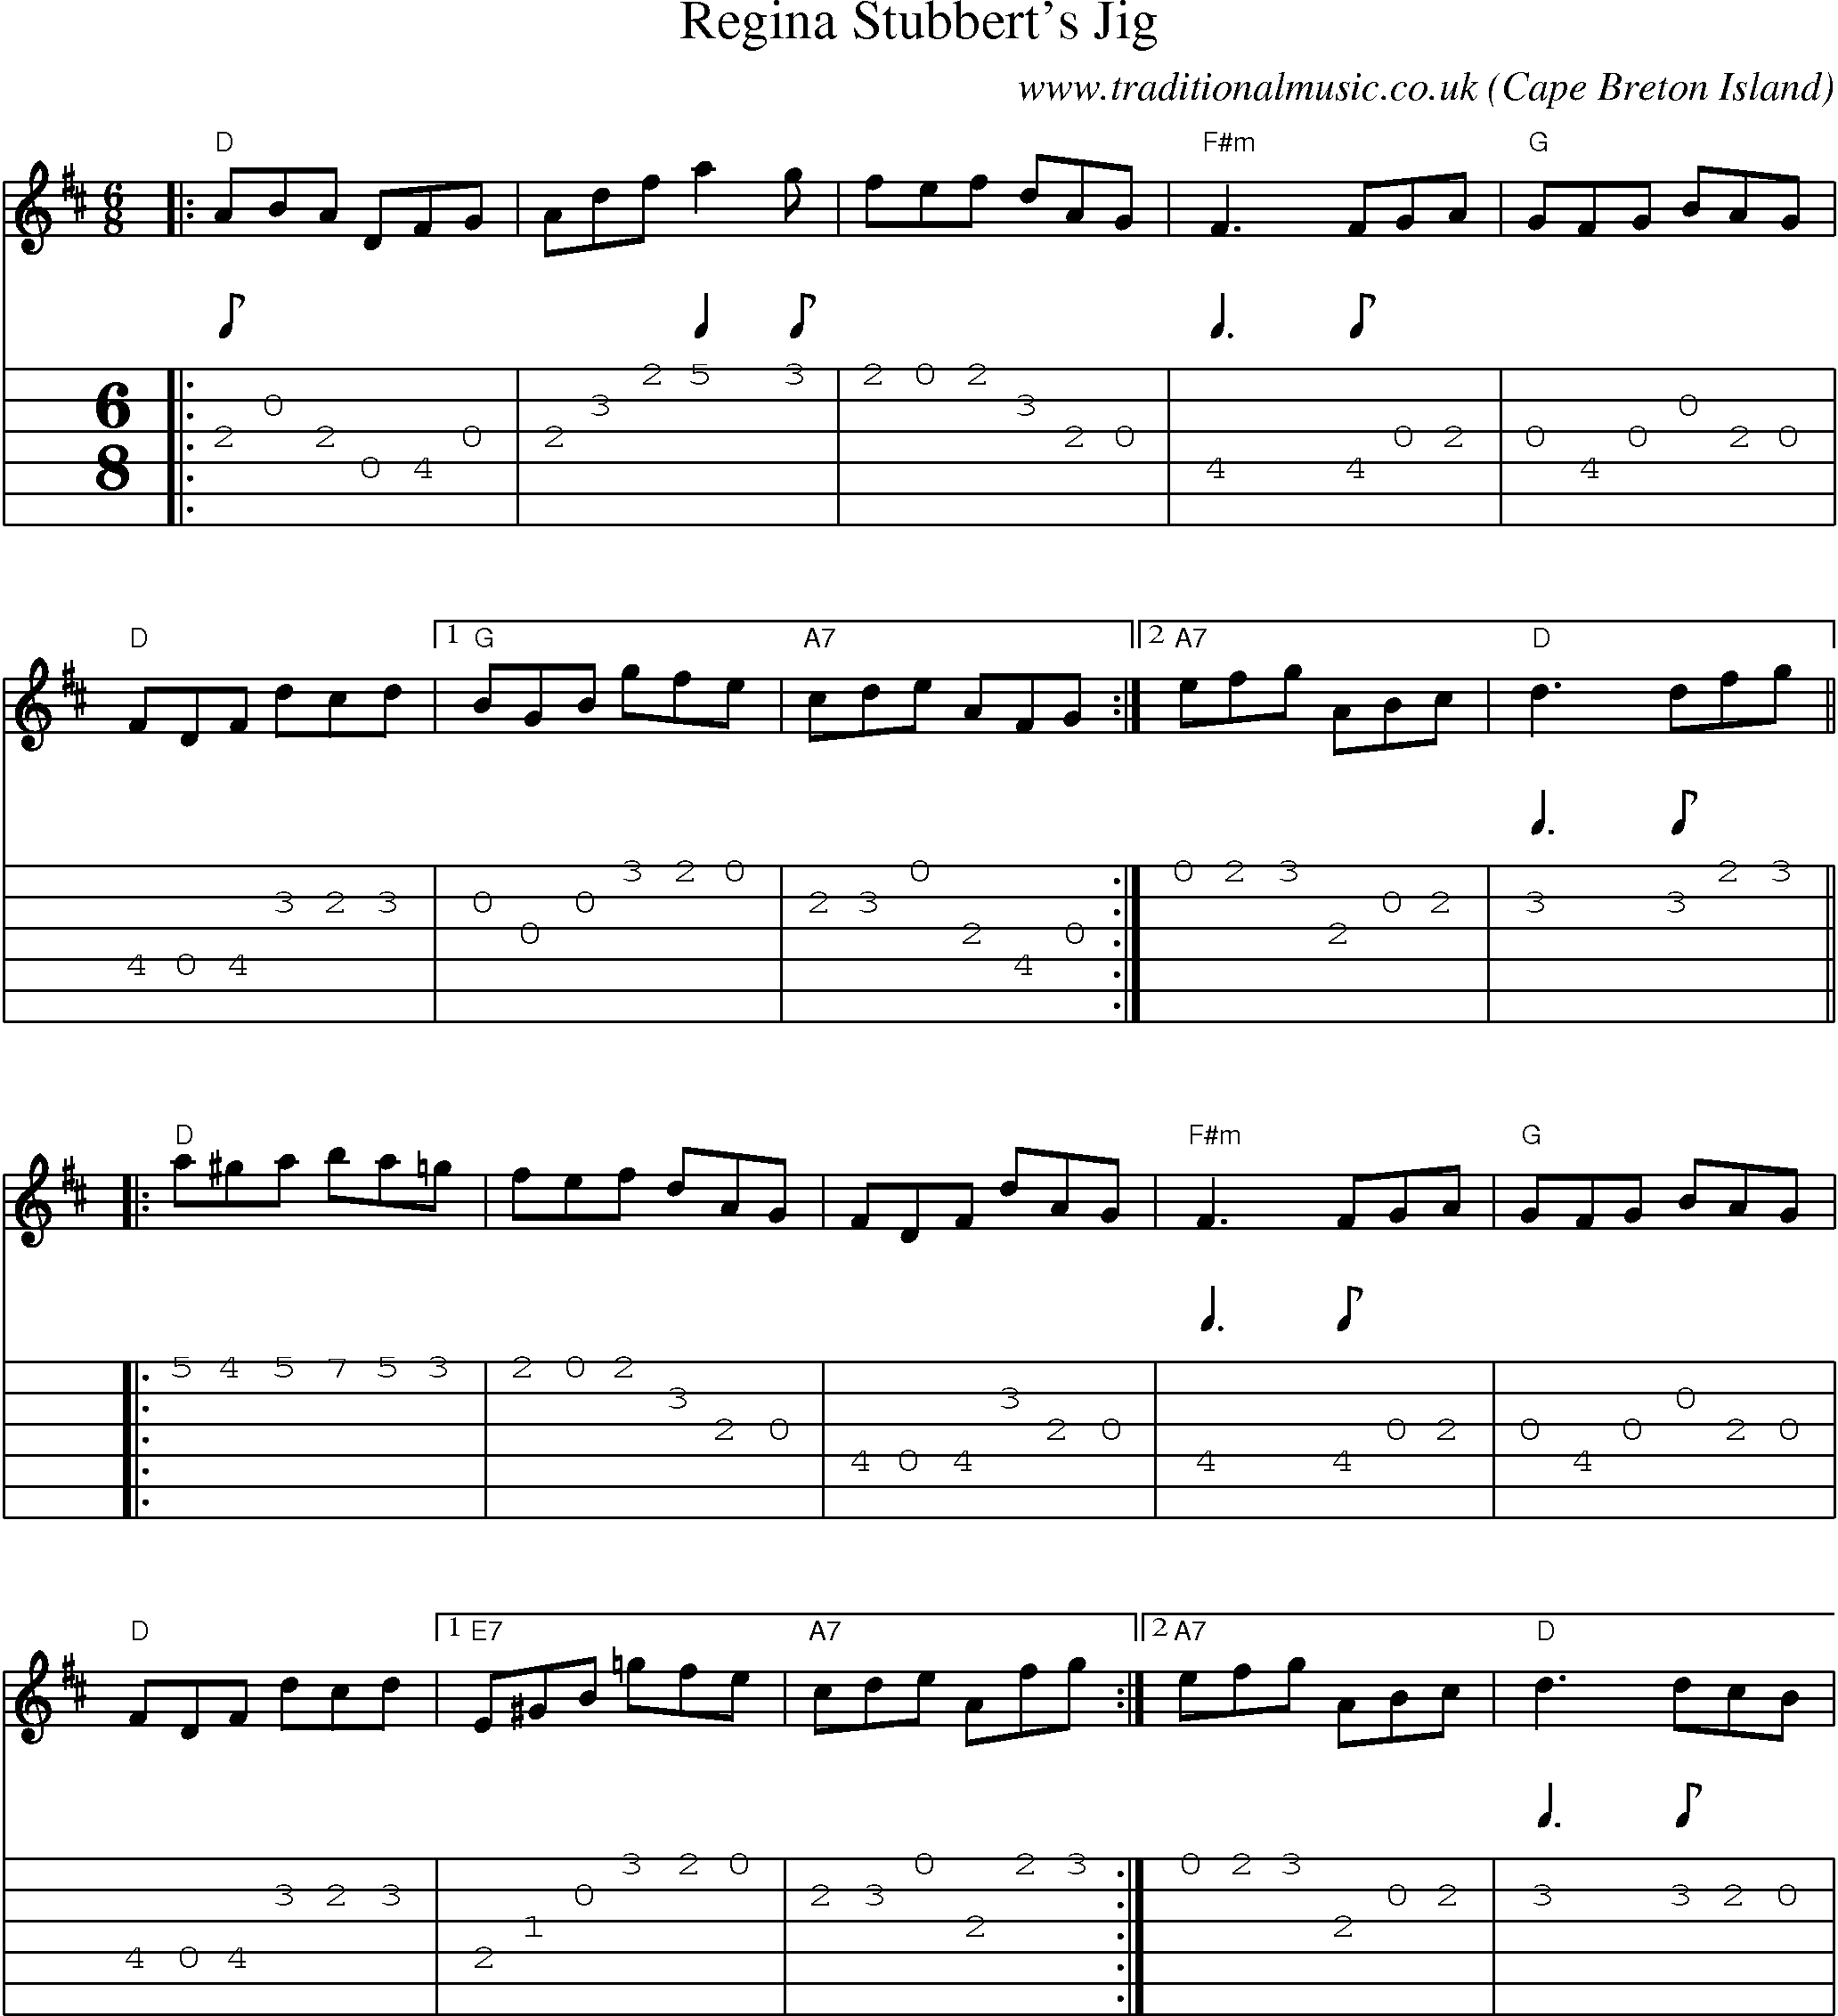 Music Score and Guitar Tabs for Regina Stubberts Jig